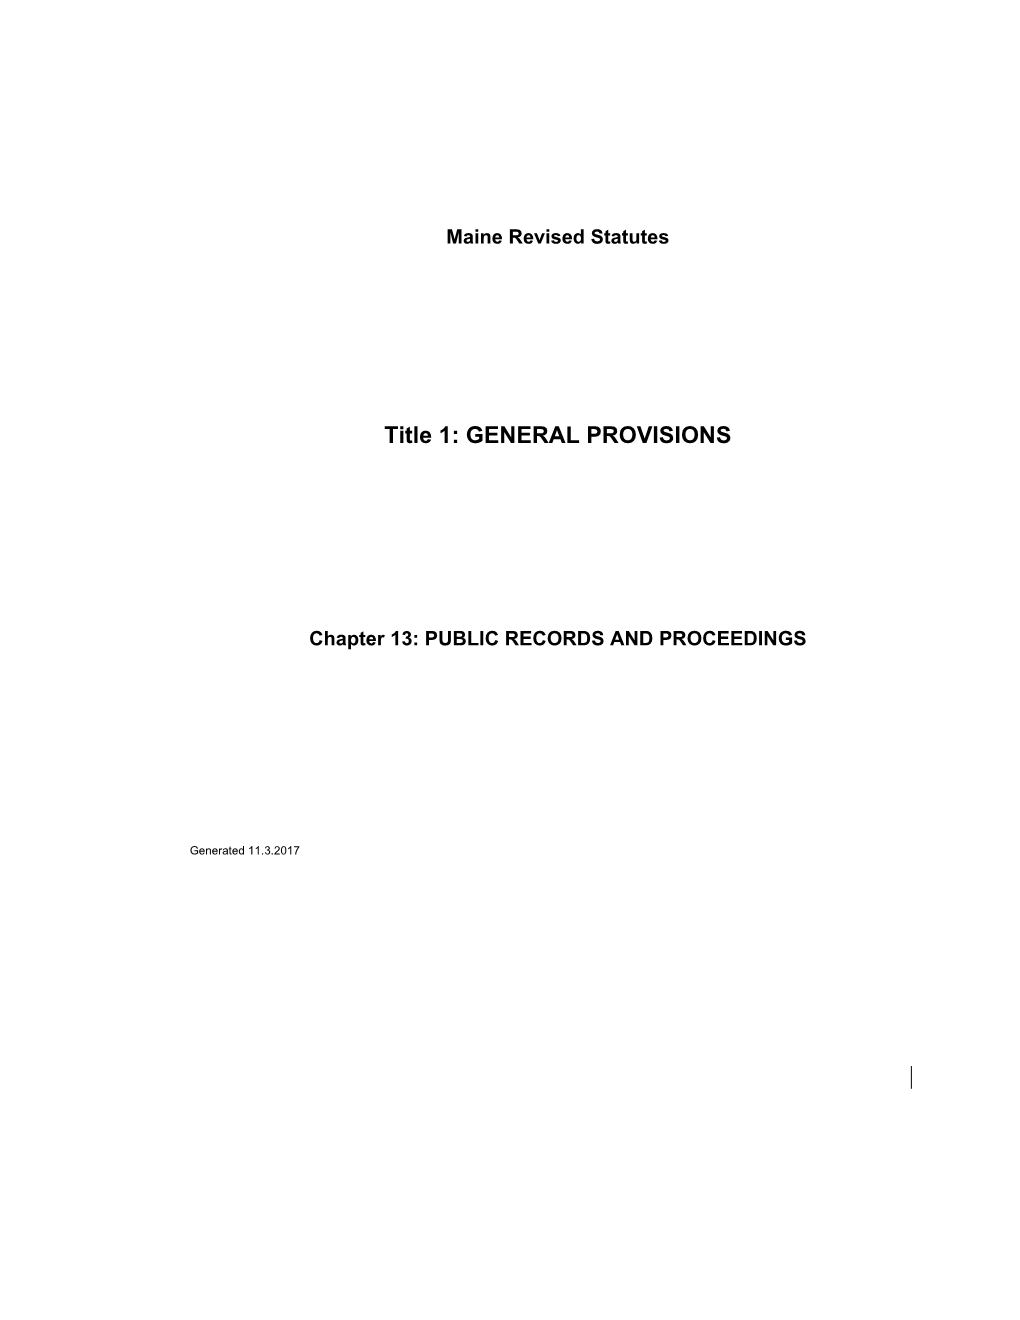 Chapter13: PUBLIC RECORDS and PROCEEDINGS